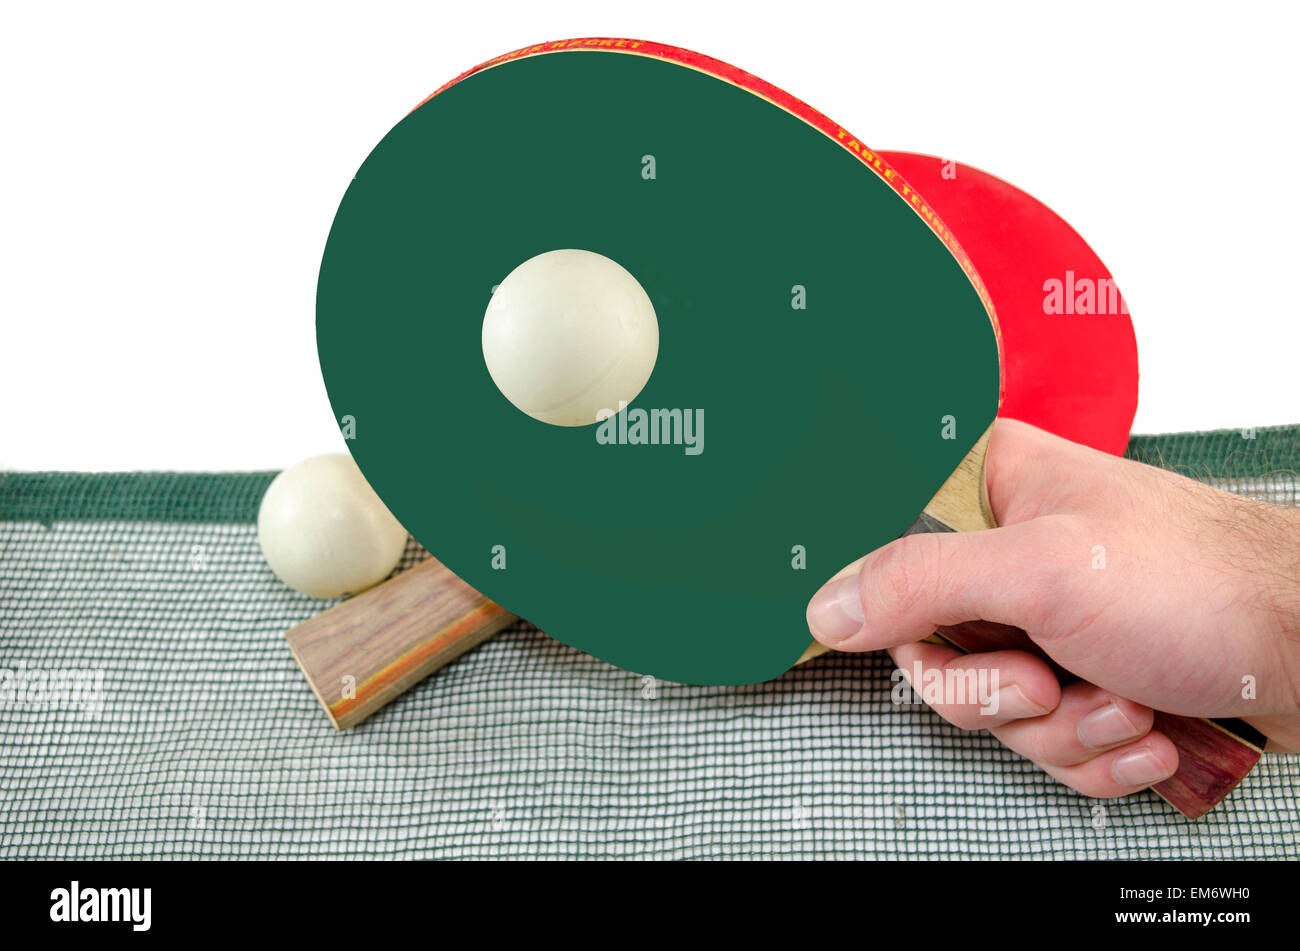 Male hand holding a ping pong racket and a table tennis ball above a net, isolated on white Stock Photo